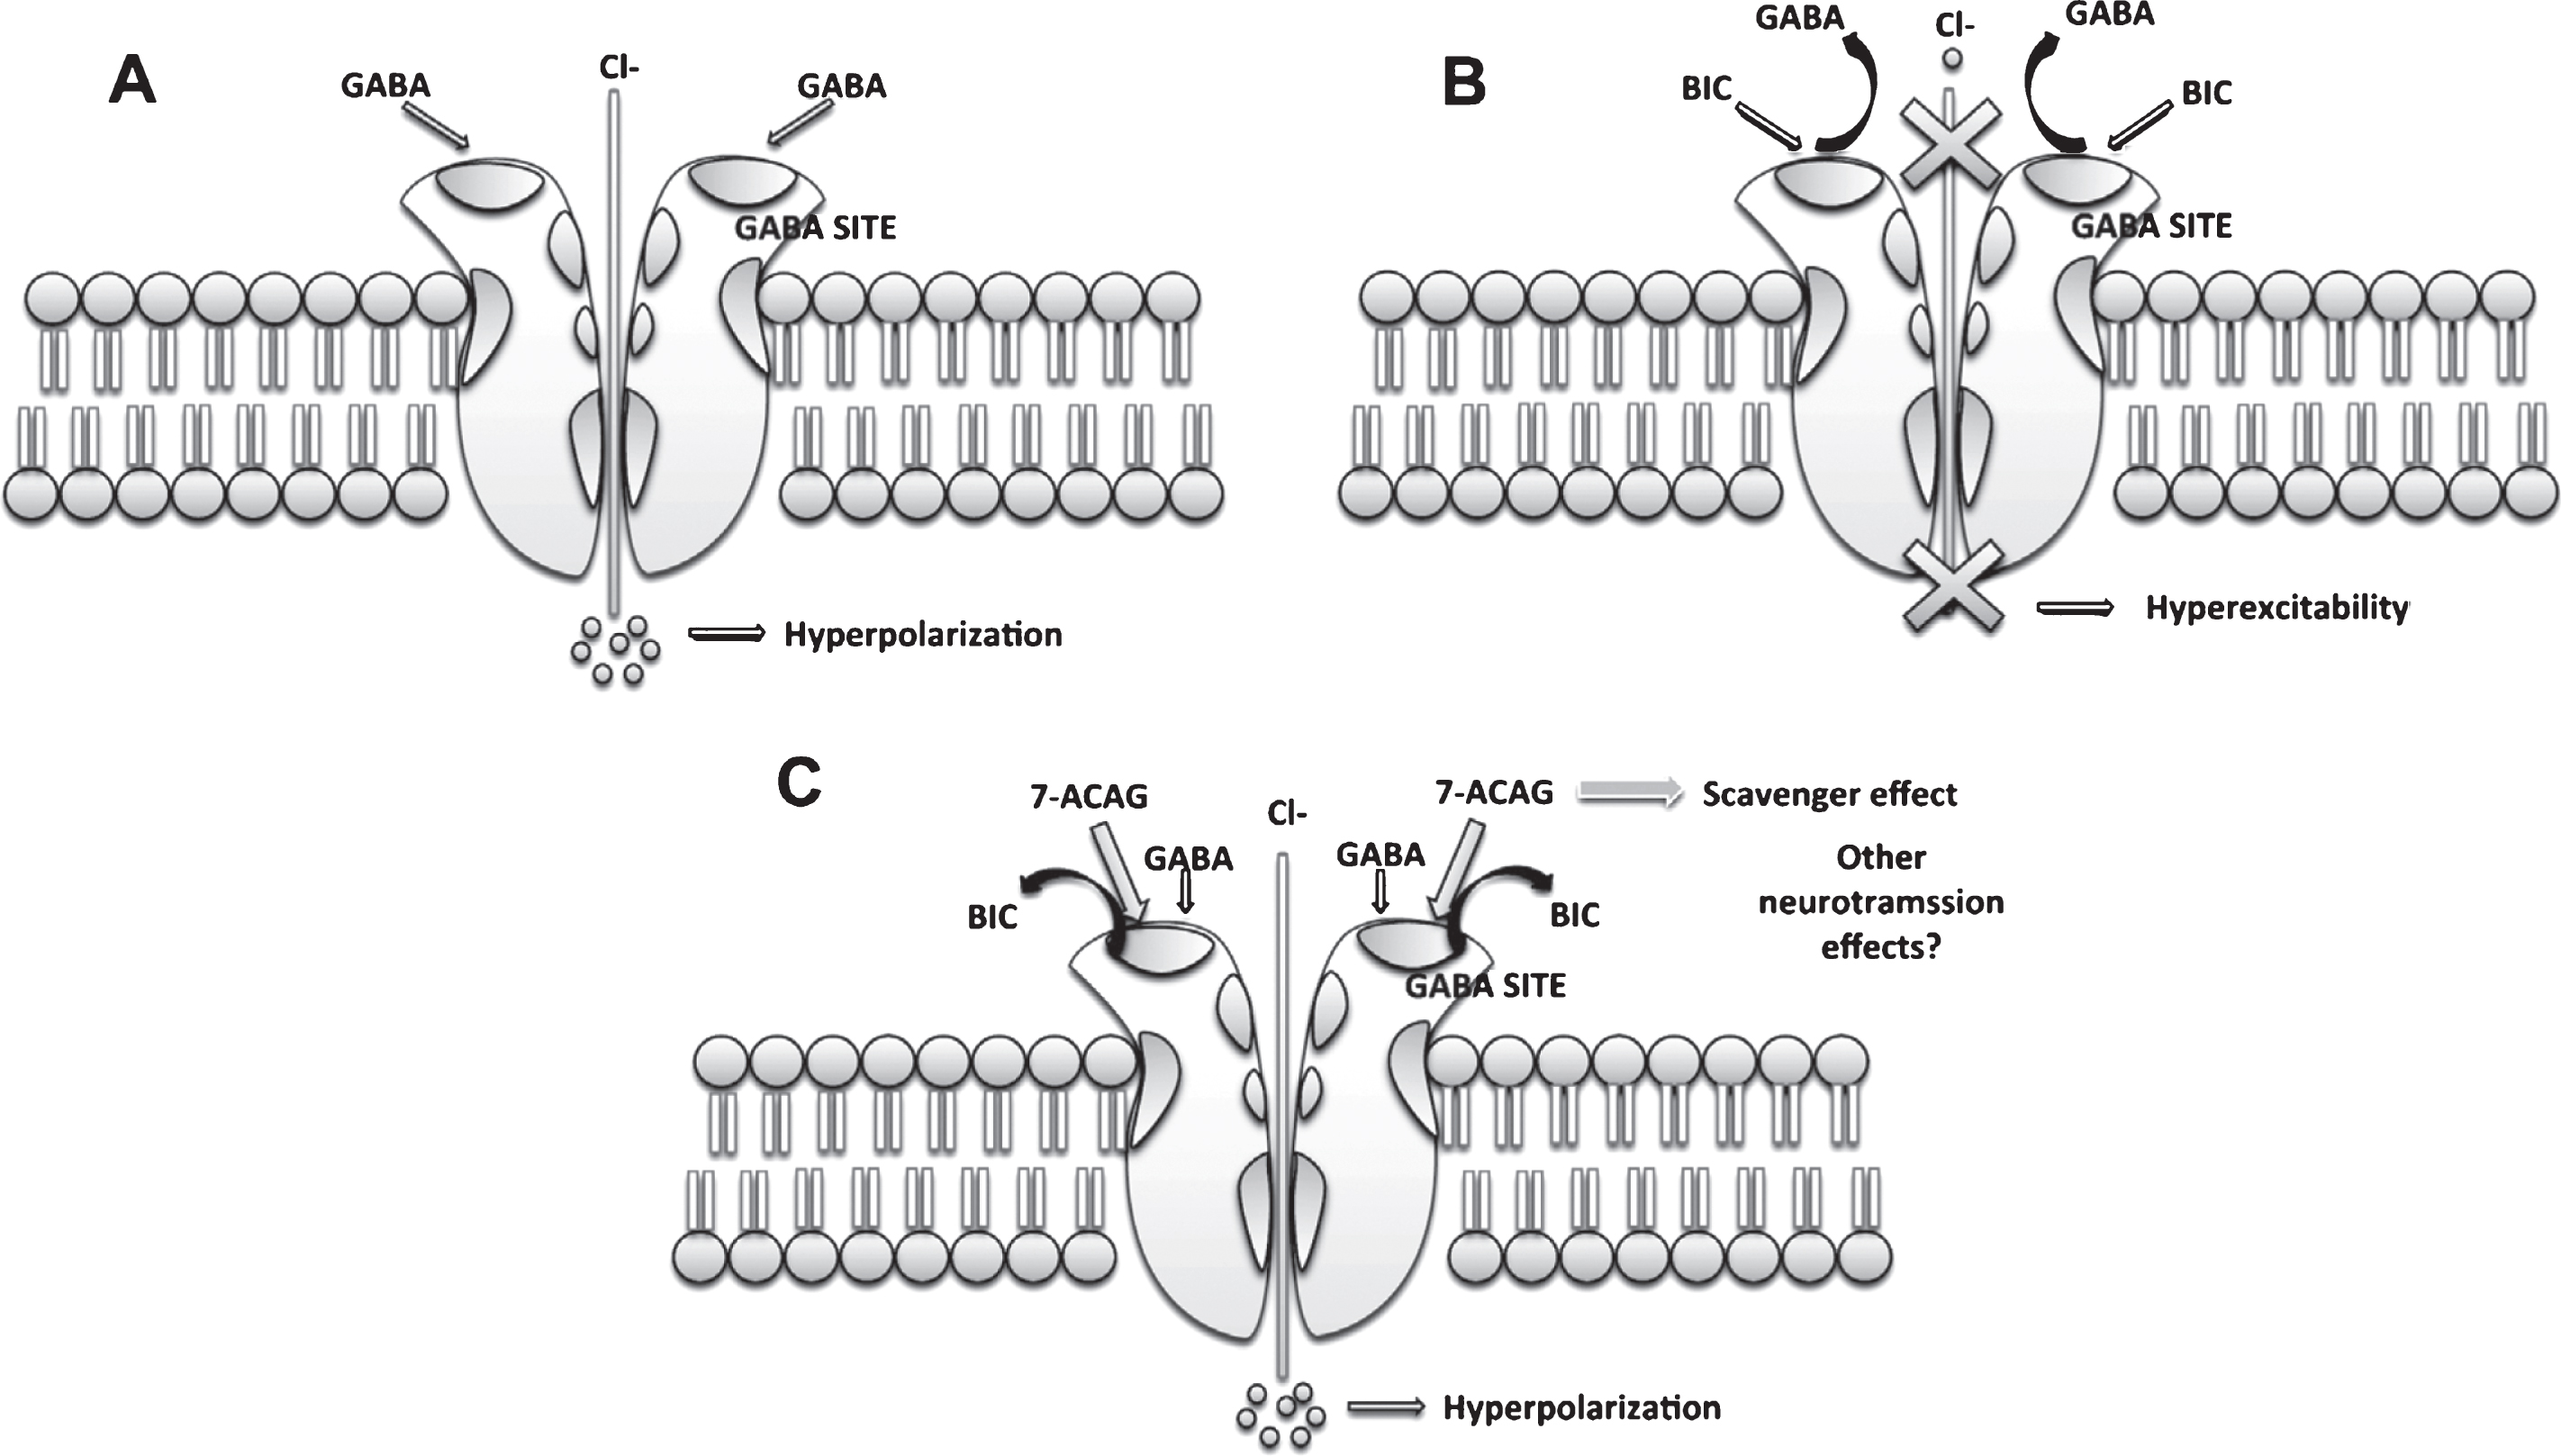 Possible mechanisms of action of 7-ACAG. A) GABA increases Cl-  entry, hyperpolarizing the cell membrane. B) Bicuculline (BIC) blocks the GABA binding site, inducing hyperexcitability. C) 7-ACAG displaces BIC from the GABA binding site reversing the blockade effect induced by BIC. Moreover, it is possible that 7-ACAG can be involved in the modulation of other neurotransmissions and produce other effects.